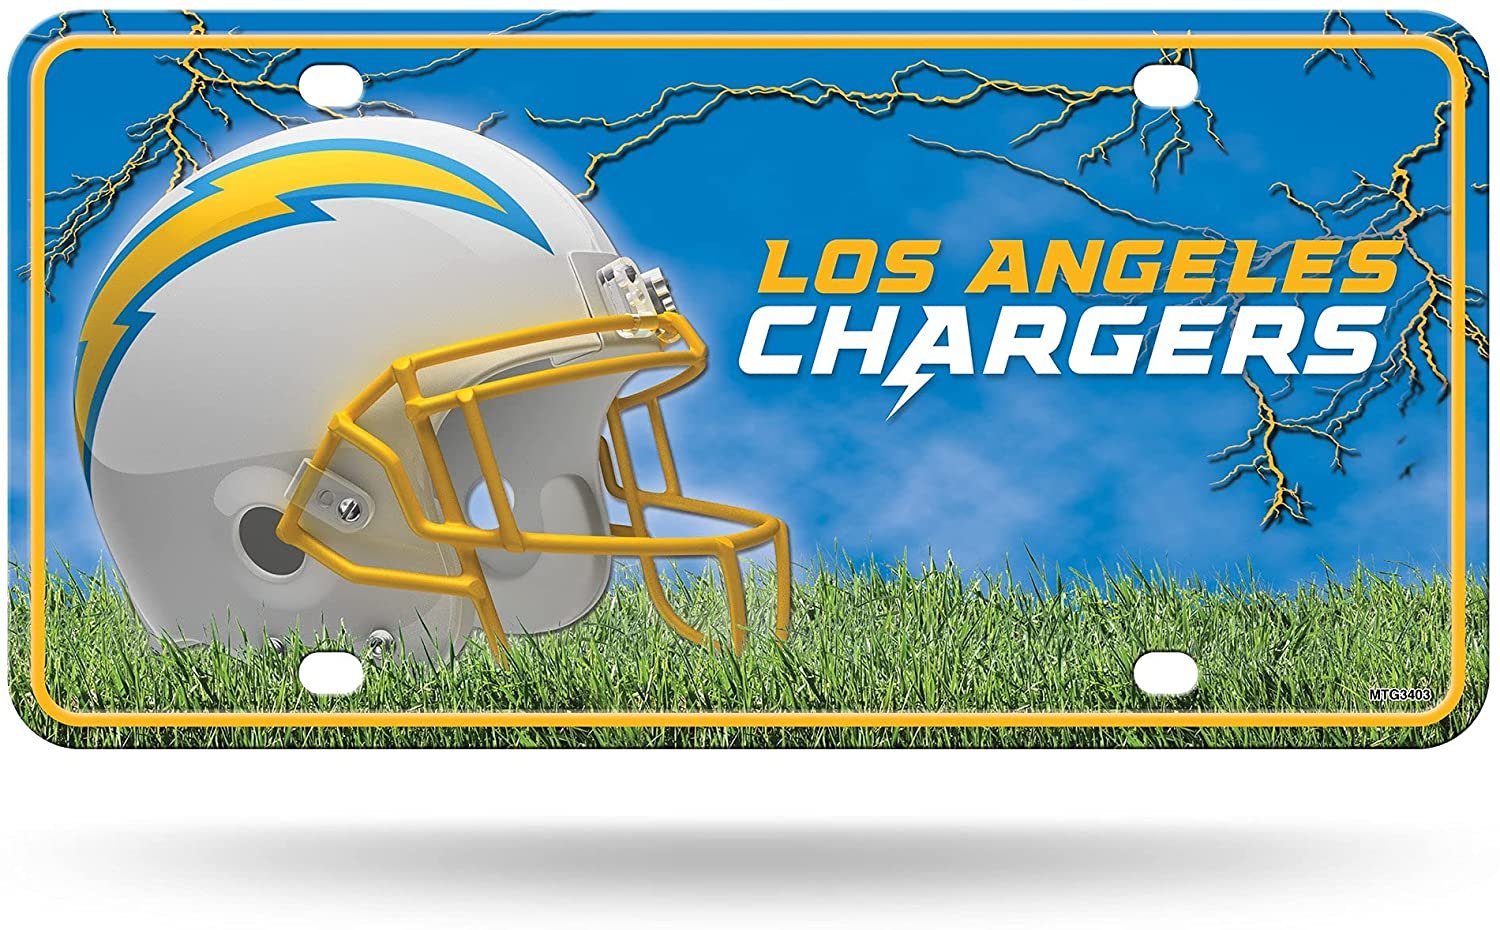 Los Angeles Chargers Metal Auto Tag License Plate, Field Design, 6x12 Inch